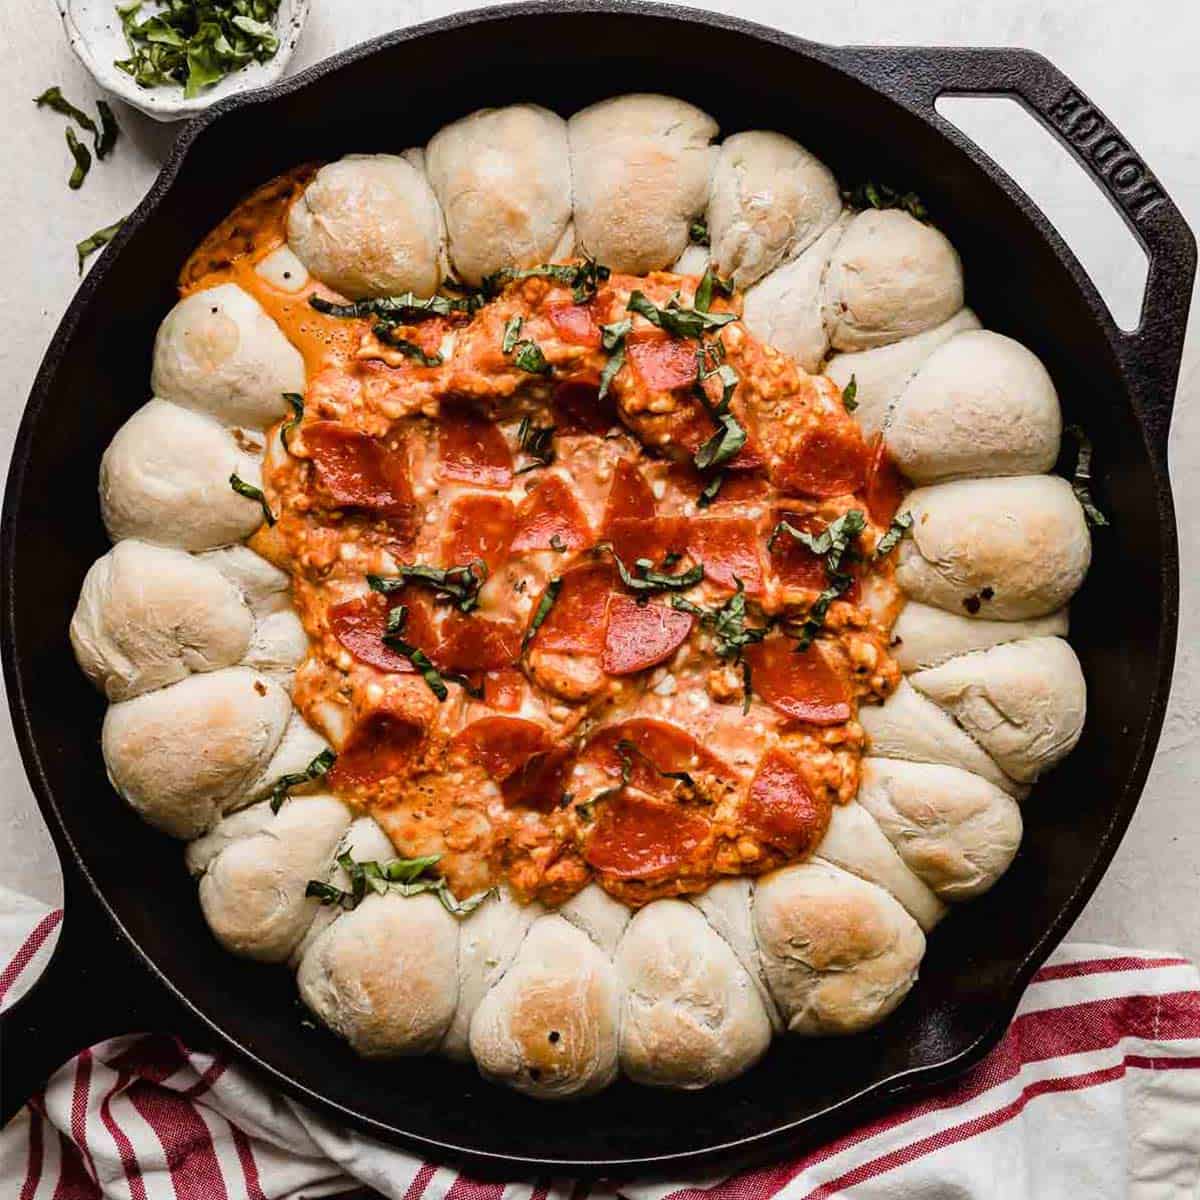 A Pepperoni Pizza Dip in a skillet.